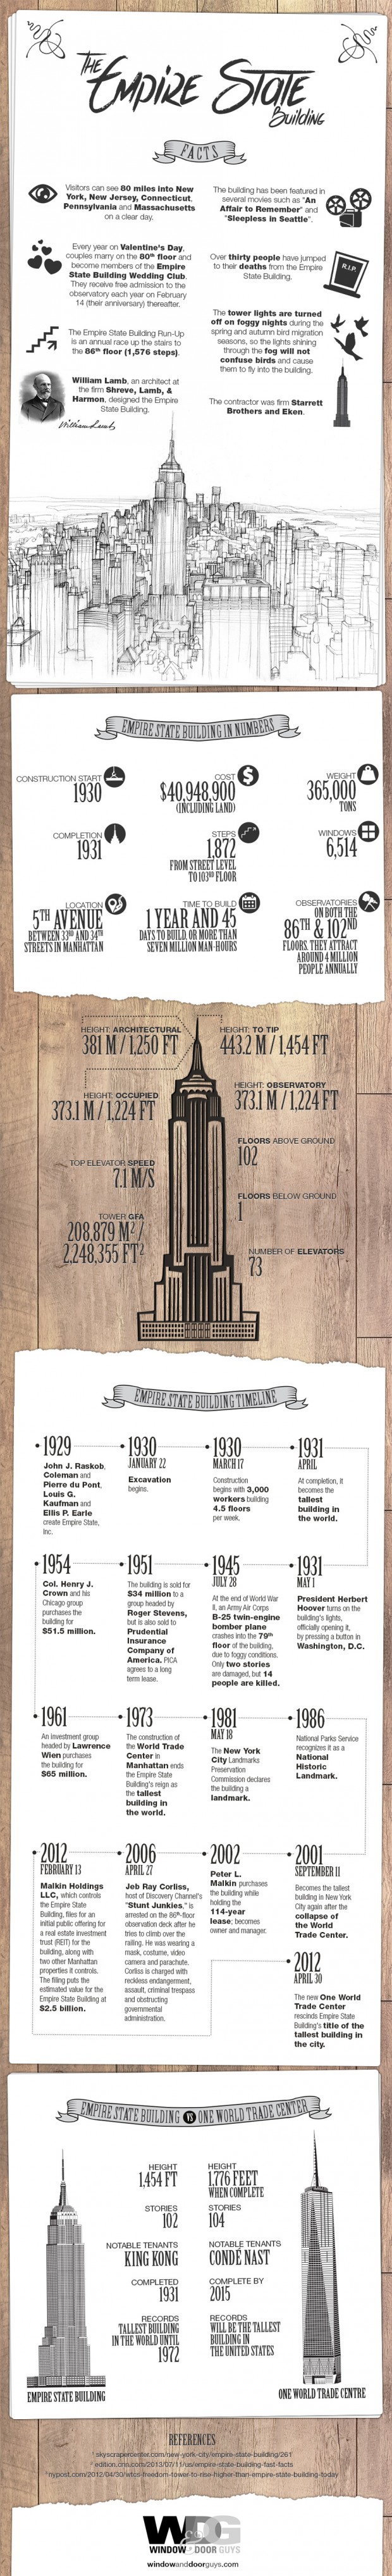 Look At and Learn More About Empire State Building in NYC